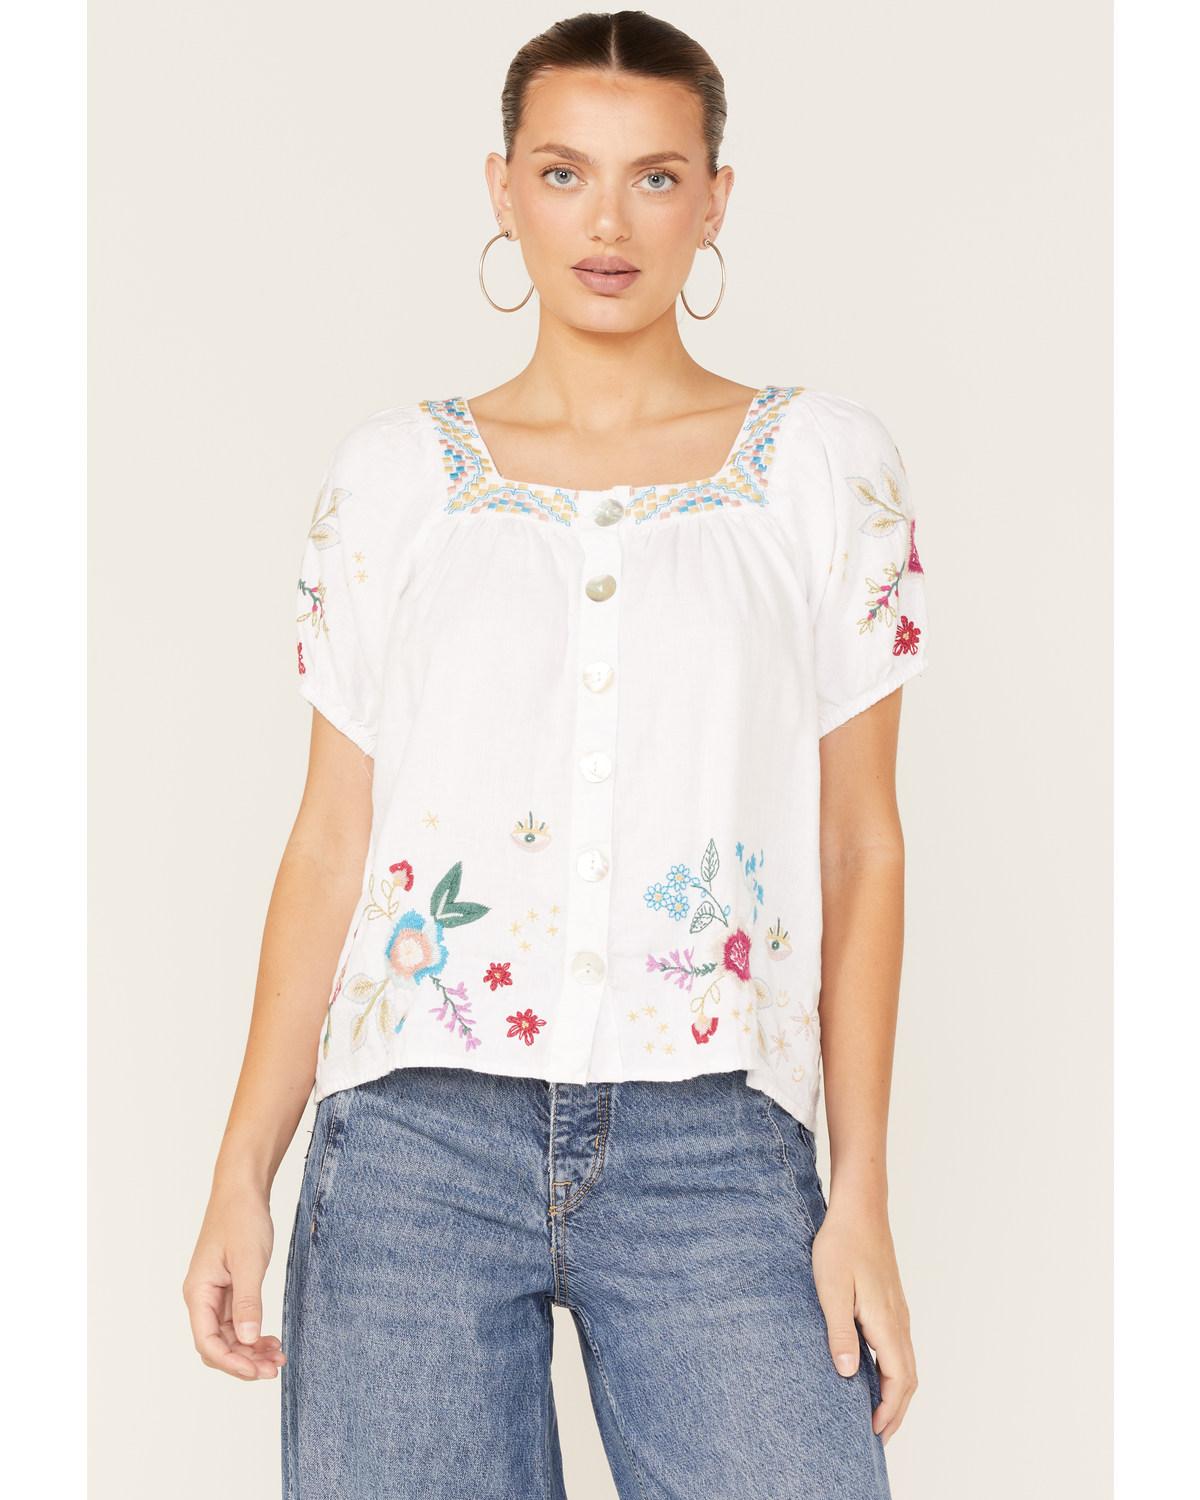 Johnny Was Women's Martine Wander Embroidered Floral Top